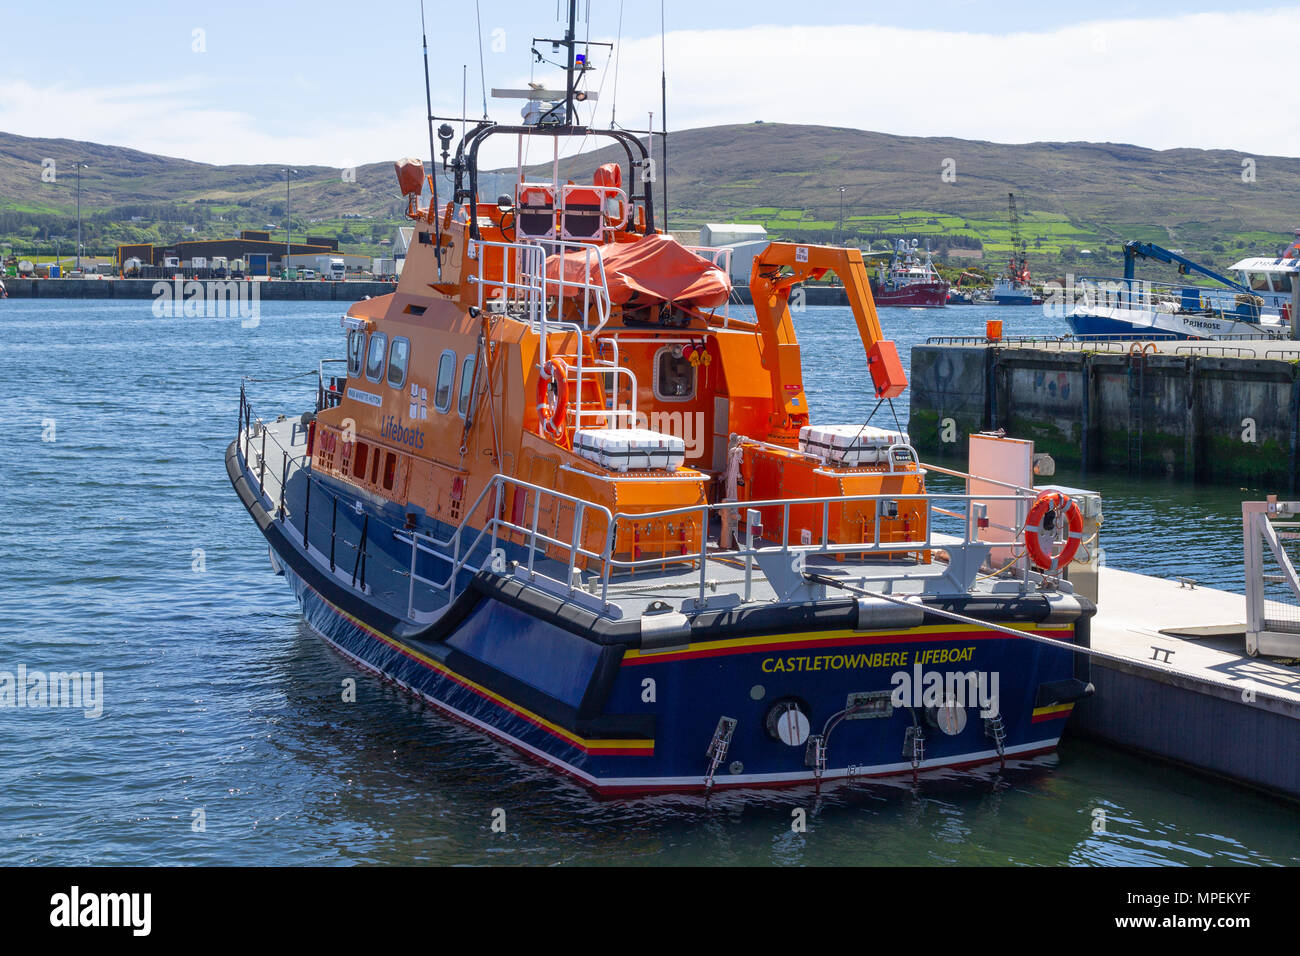 Rnlb Annette hutton,in castletownbere, the Severn class is the largest lifeboat operated by the Royal National Lifeboat Institution. Stock Photo